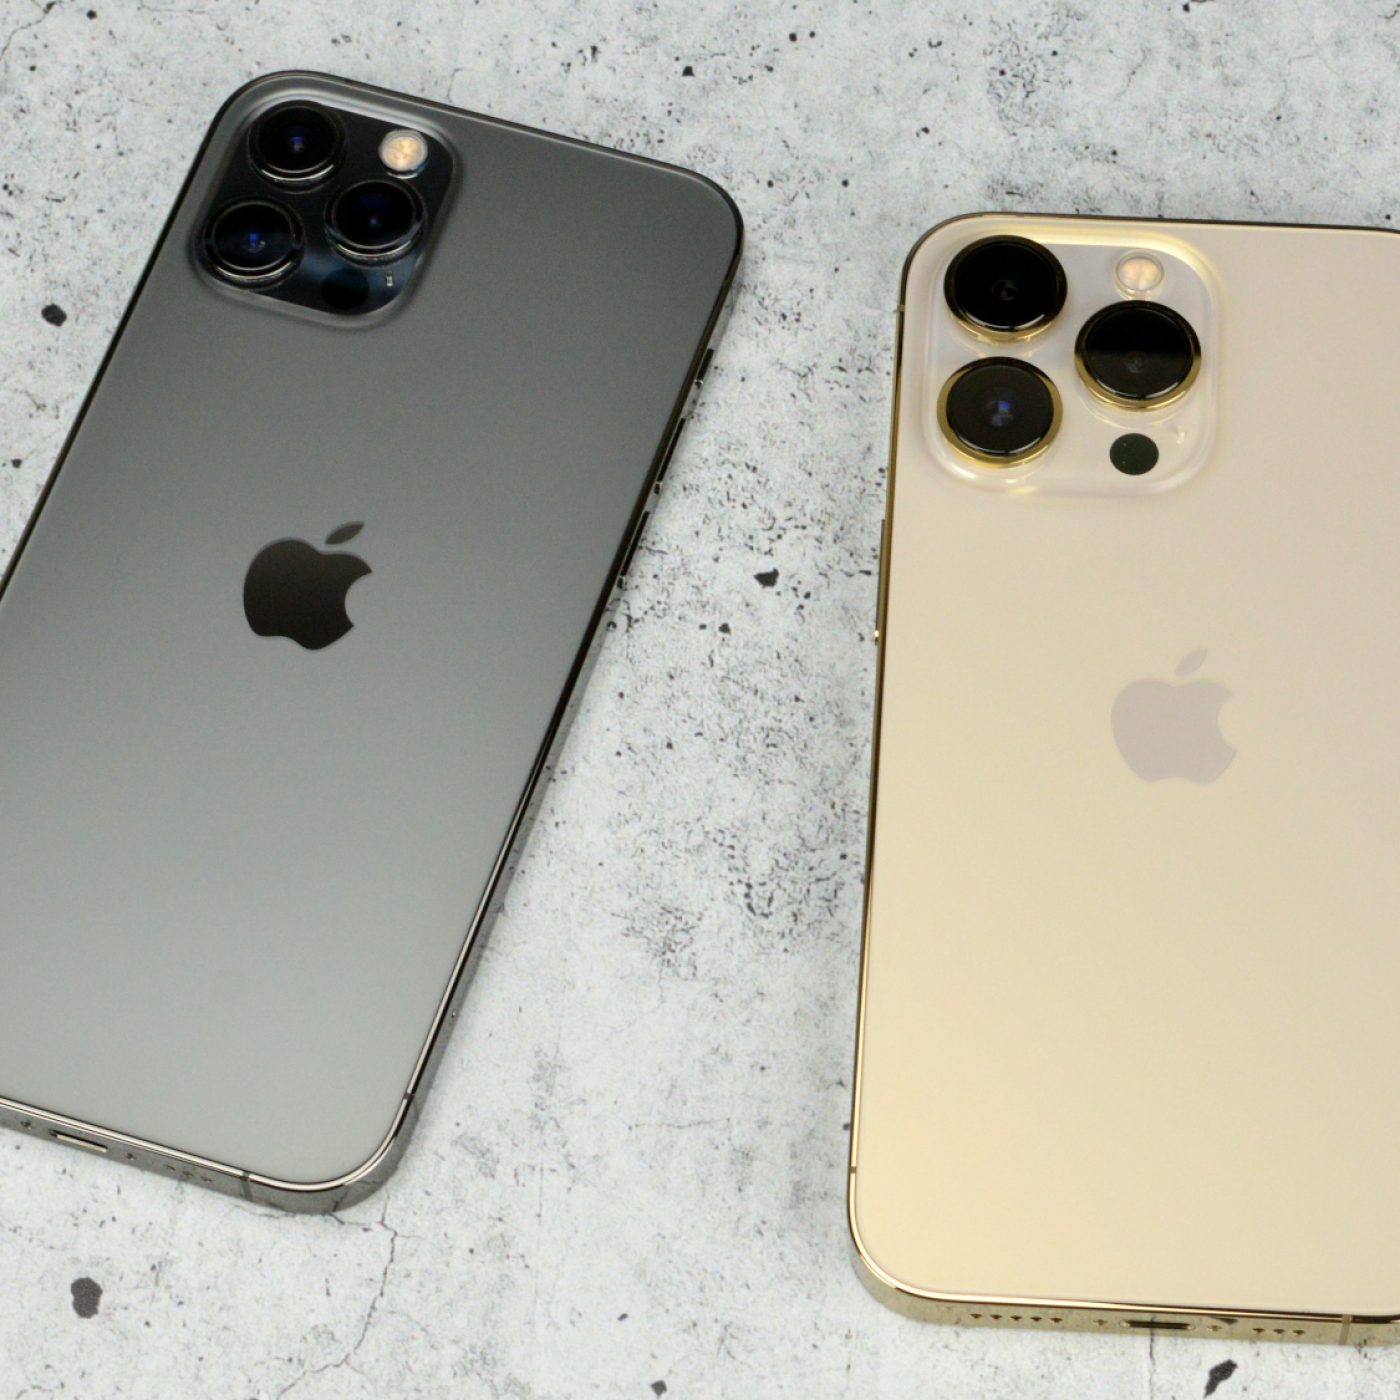 iPhone 12 vs iPhone 11 Pro Max Which is better? 